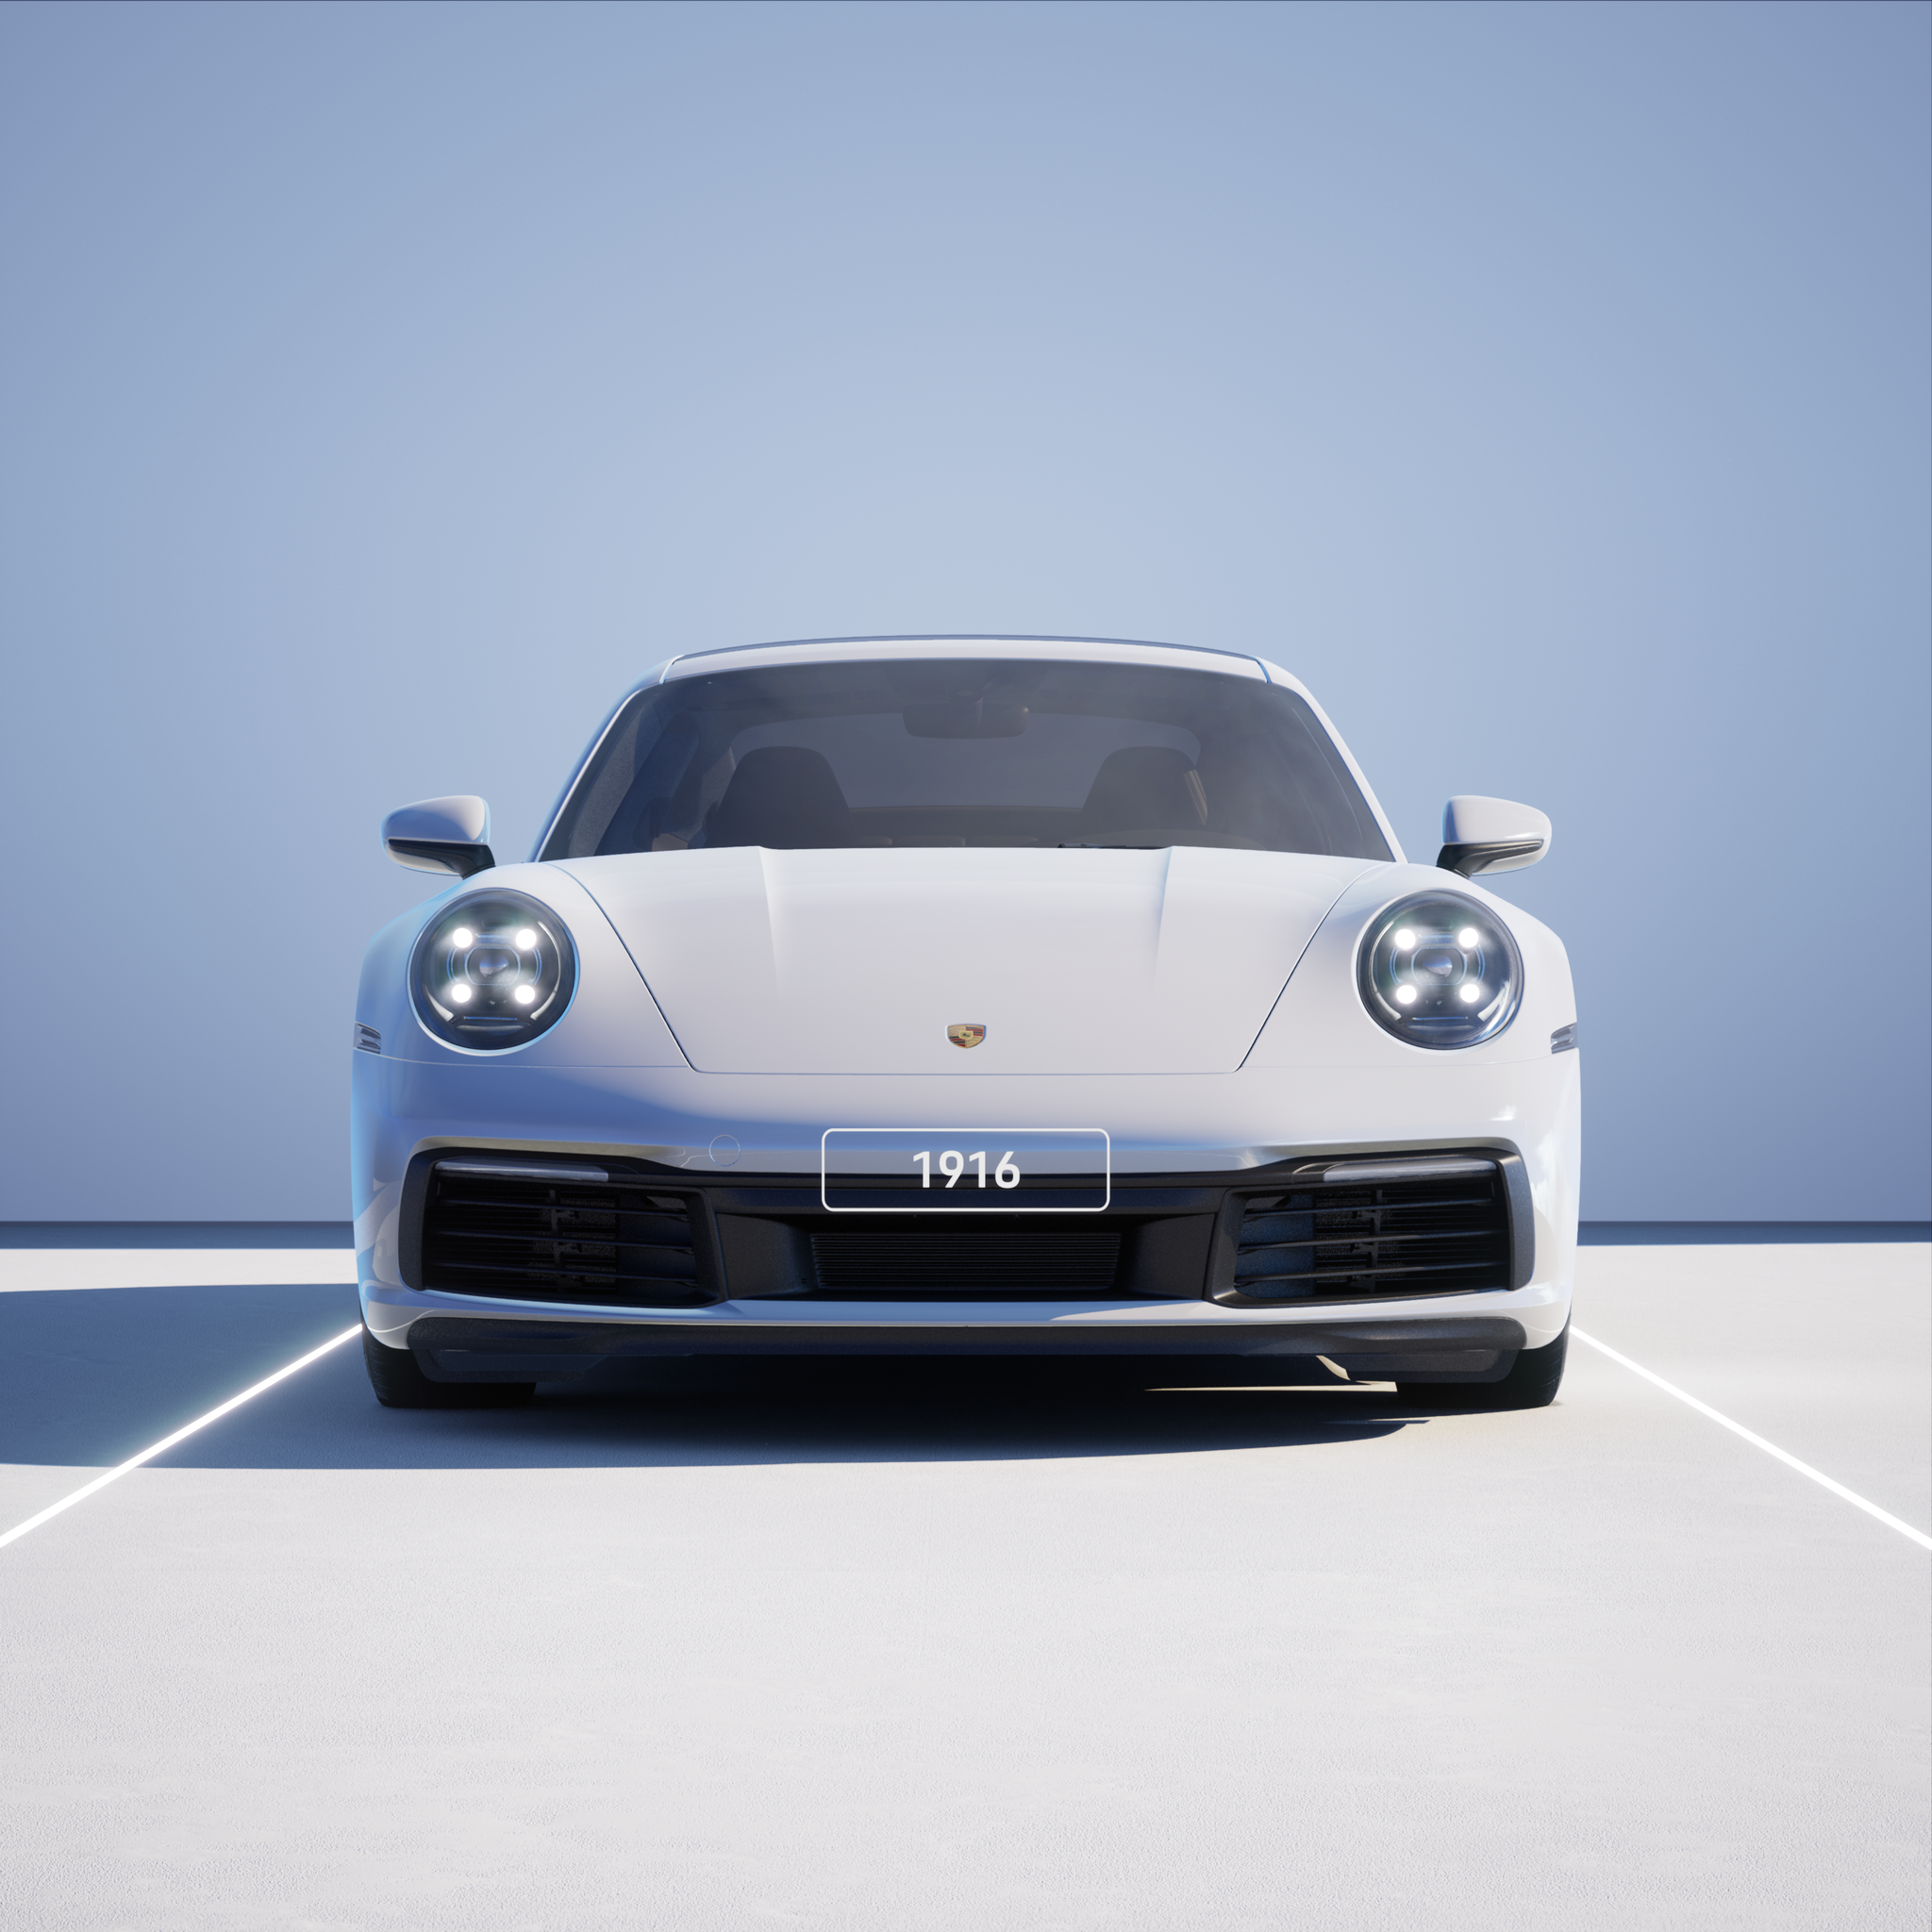 The PORSCHΞ 911 1916 image in phase